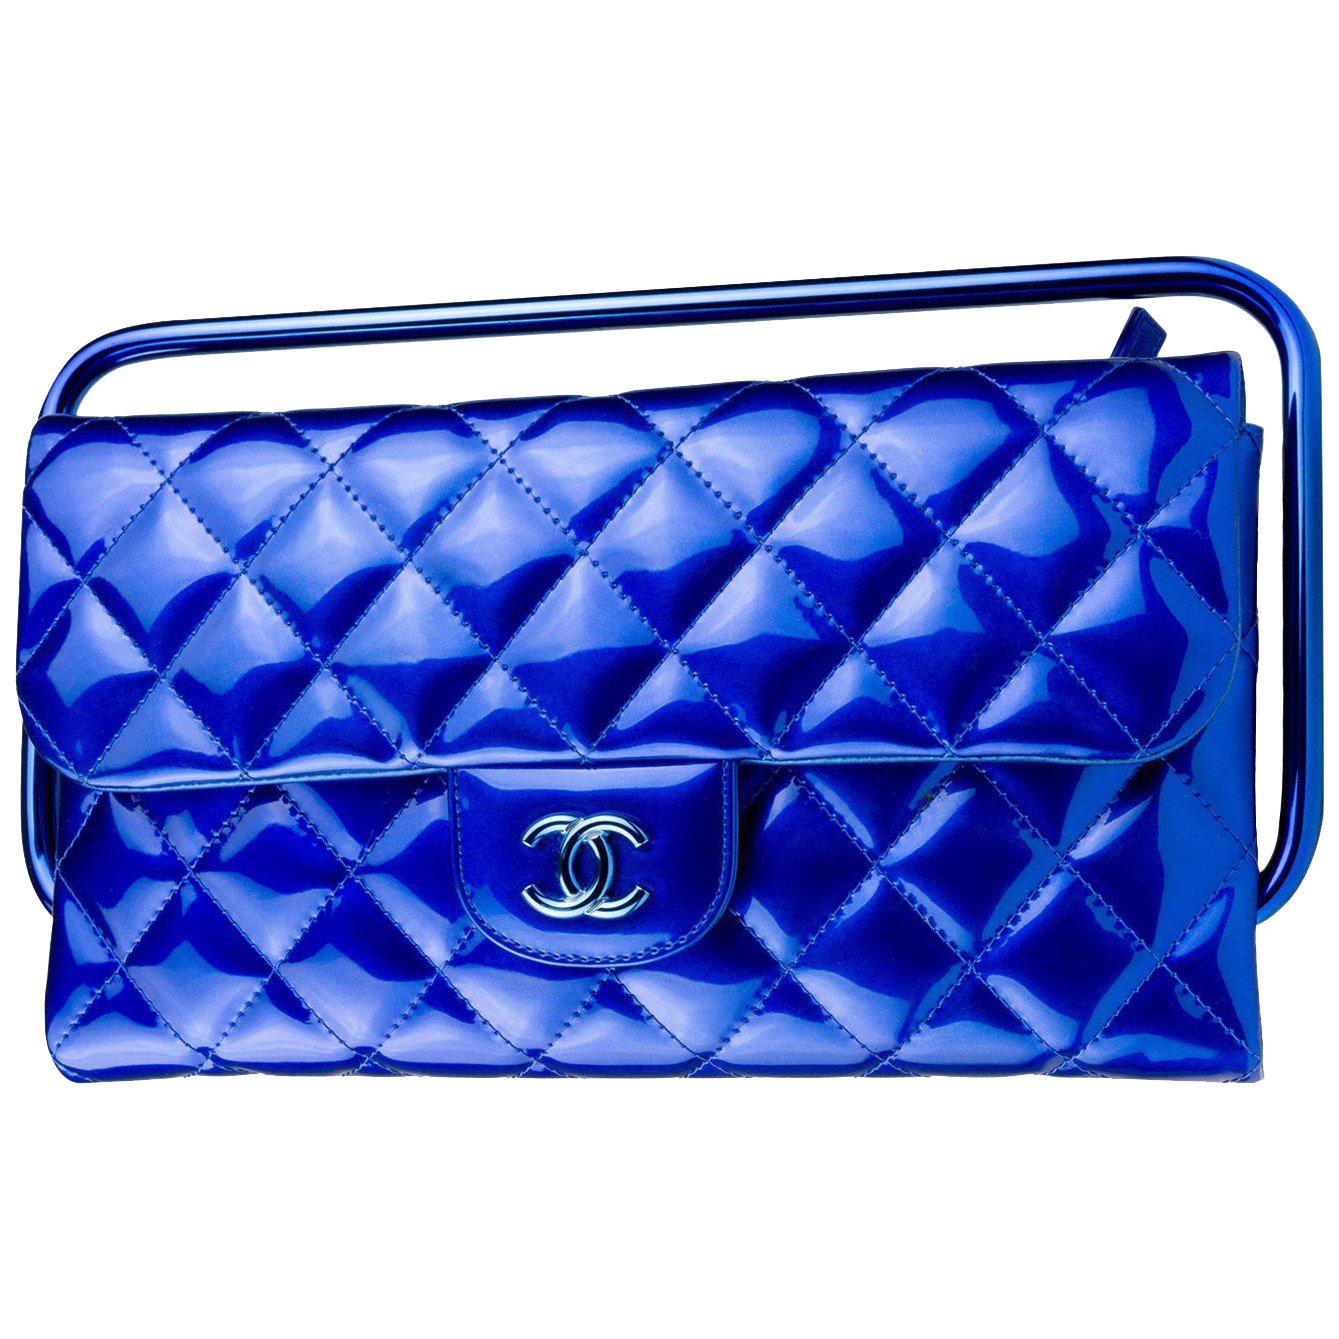 Chanel 2014 Electric Blue Patent Leather Quilted Retractable Frame Clutch Bag For Sale